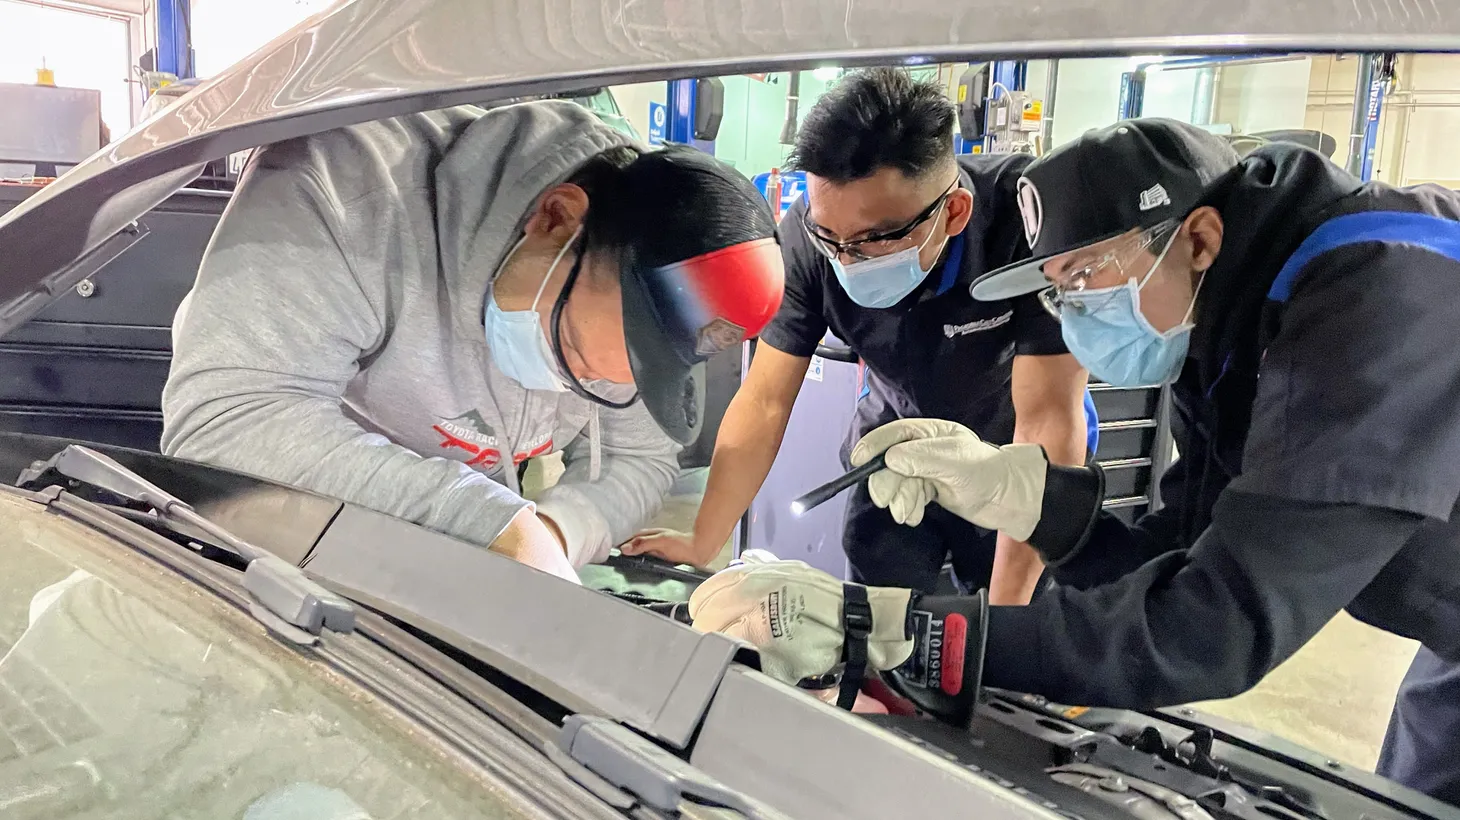 Pasadena City College automotive technician students Tahar Ellouz, Javier Compos and Joshua Wharton access the battery of an all-electric Chevy Bolt during an introductory course on electric car repair.